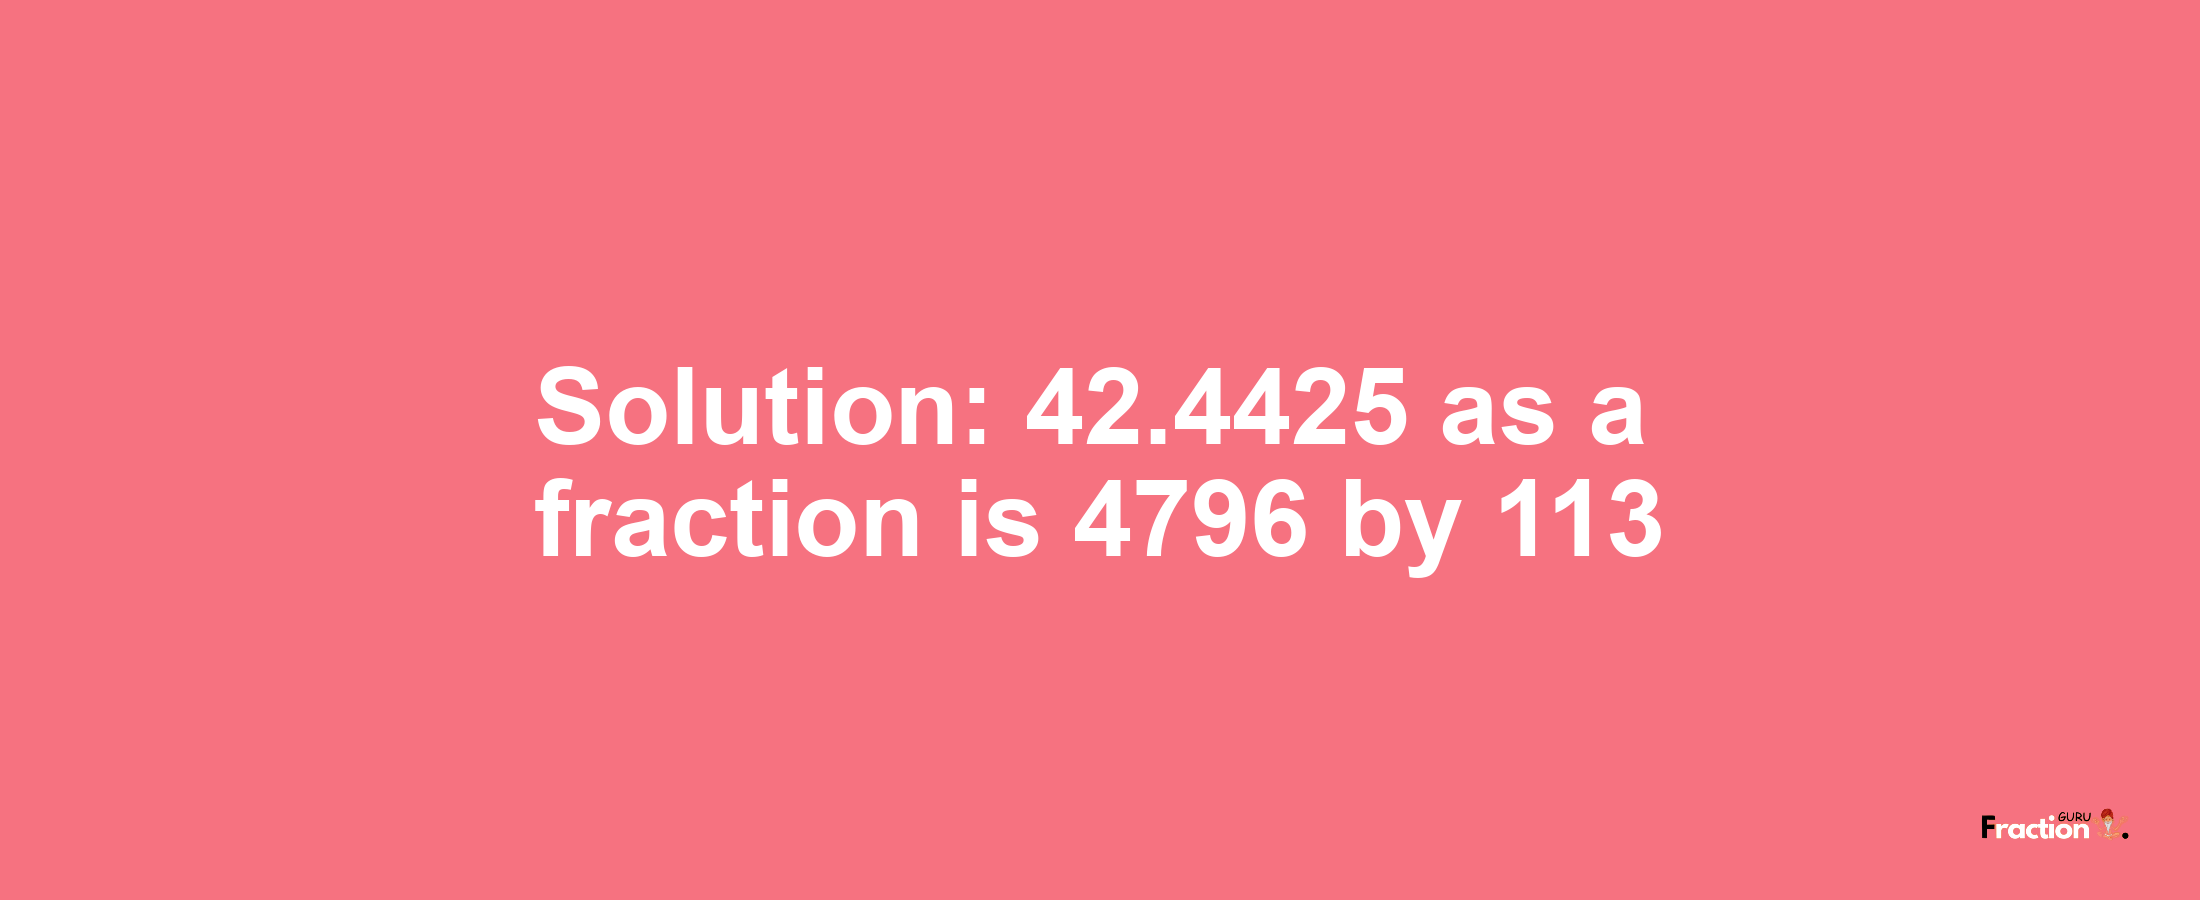 Solution:42.4425 as a fraction is 4796/113